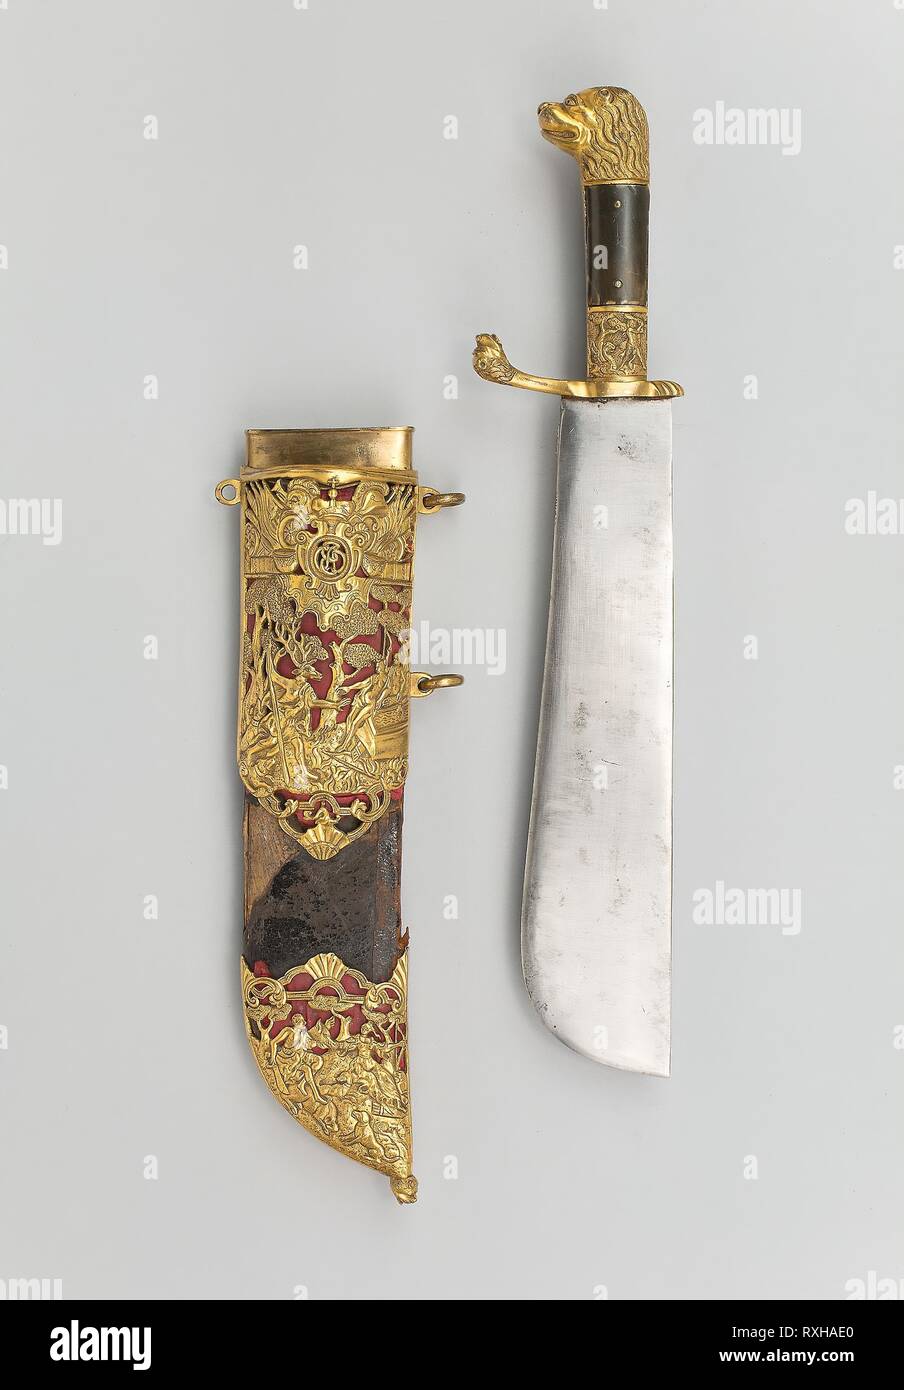 Hunting Cleaver (Waidpraxe) of Ernst August II Konstantin, Duke of Saxe-Weimar-Eisenach. German. Date: 1755-1758. Dimensions: Cleaver: Overall L. 36.2 cm (14 1/4 in.)   Blade L. 25 cm (9 7/8 in.)   Weight: 2 lb.  Cleaver in scabbard weight: 2 lb. 2 oz. Steel, bronze, gilding, horn, wood, leather, and silk. Origin: Germany. Museum: The Chicago Art Institute. Stock Photo